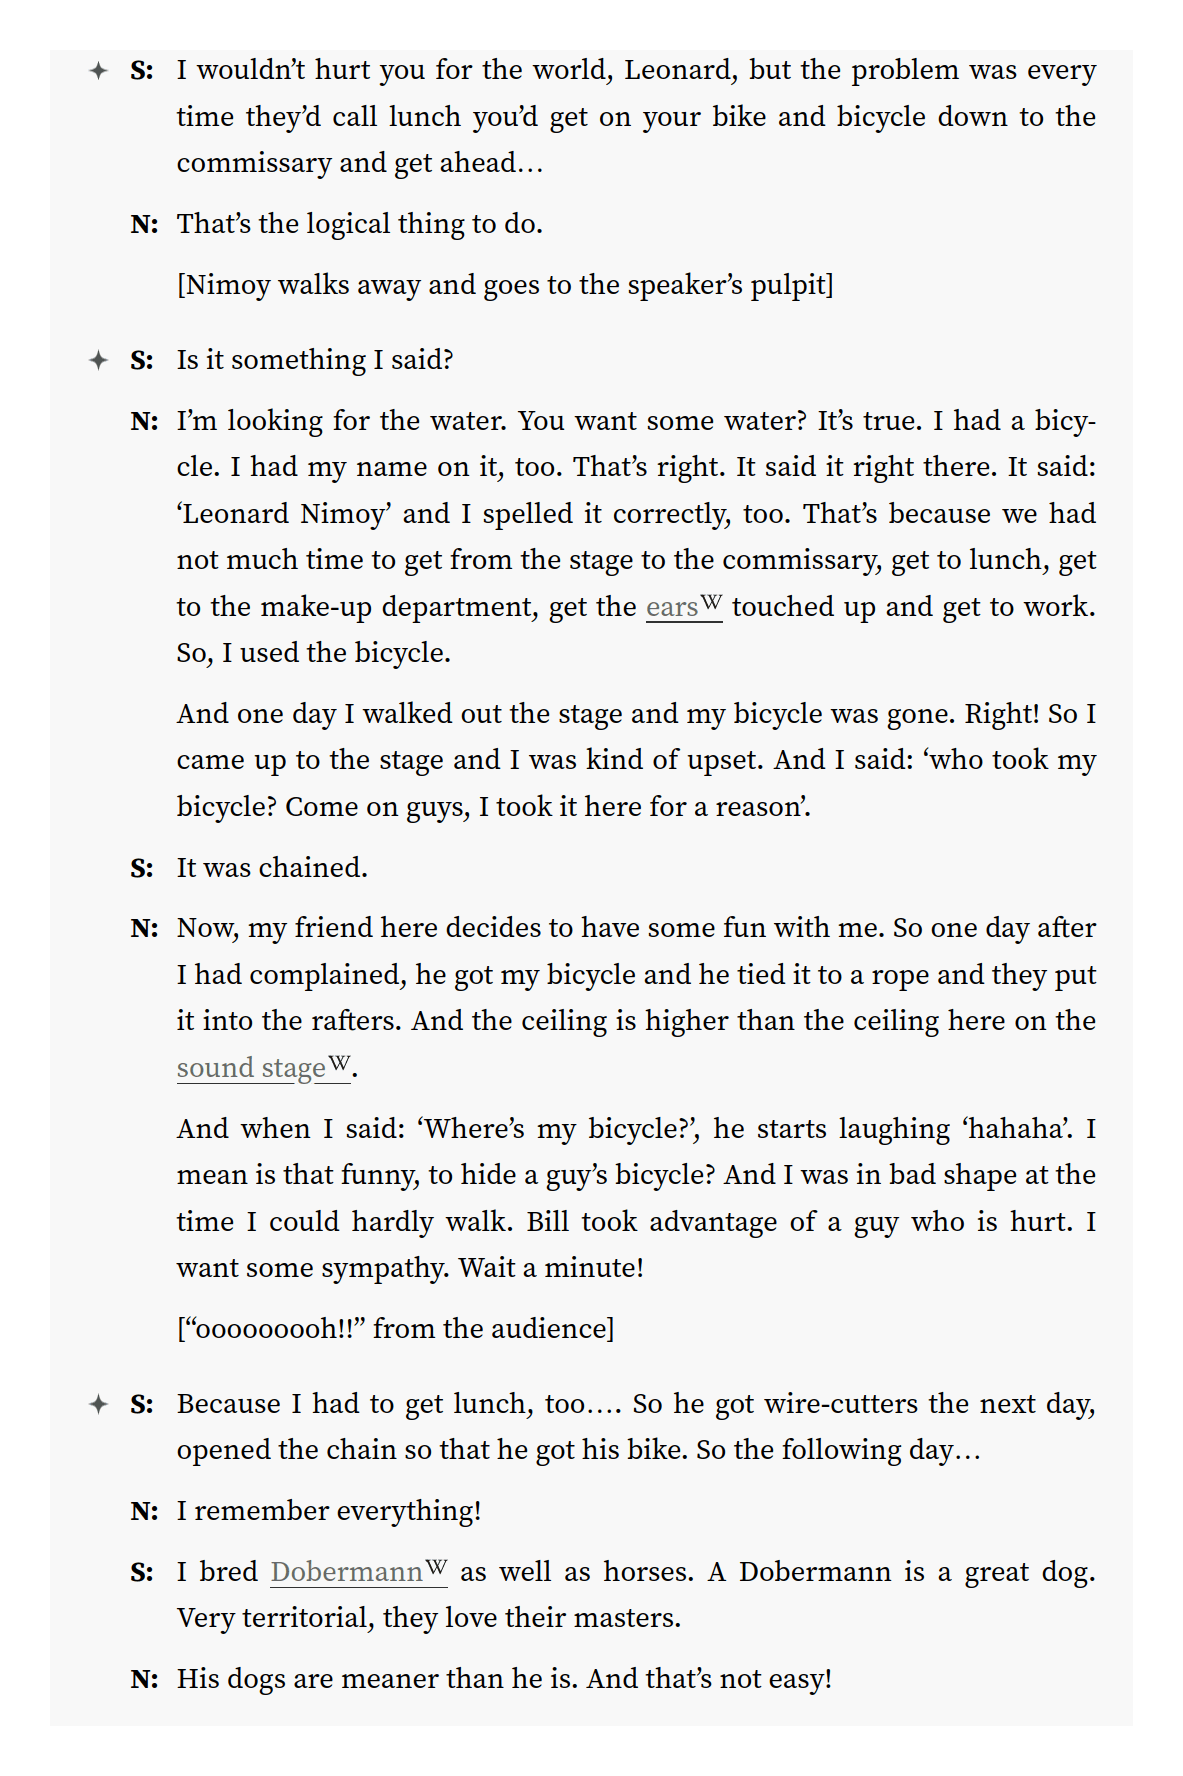 Example of discussion between William Shatner & Leonard Nimoy, which does not fall neatly into a simple Q&A but is readable when grouped & aligned in a two-level list organization. For another example, see Hamming1986’s Q&A (annotation examples: 1, 2, 3).